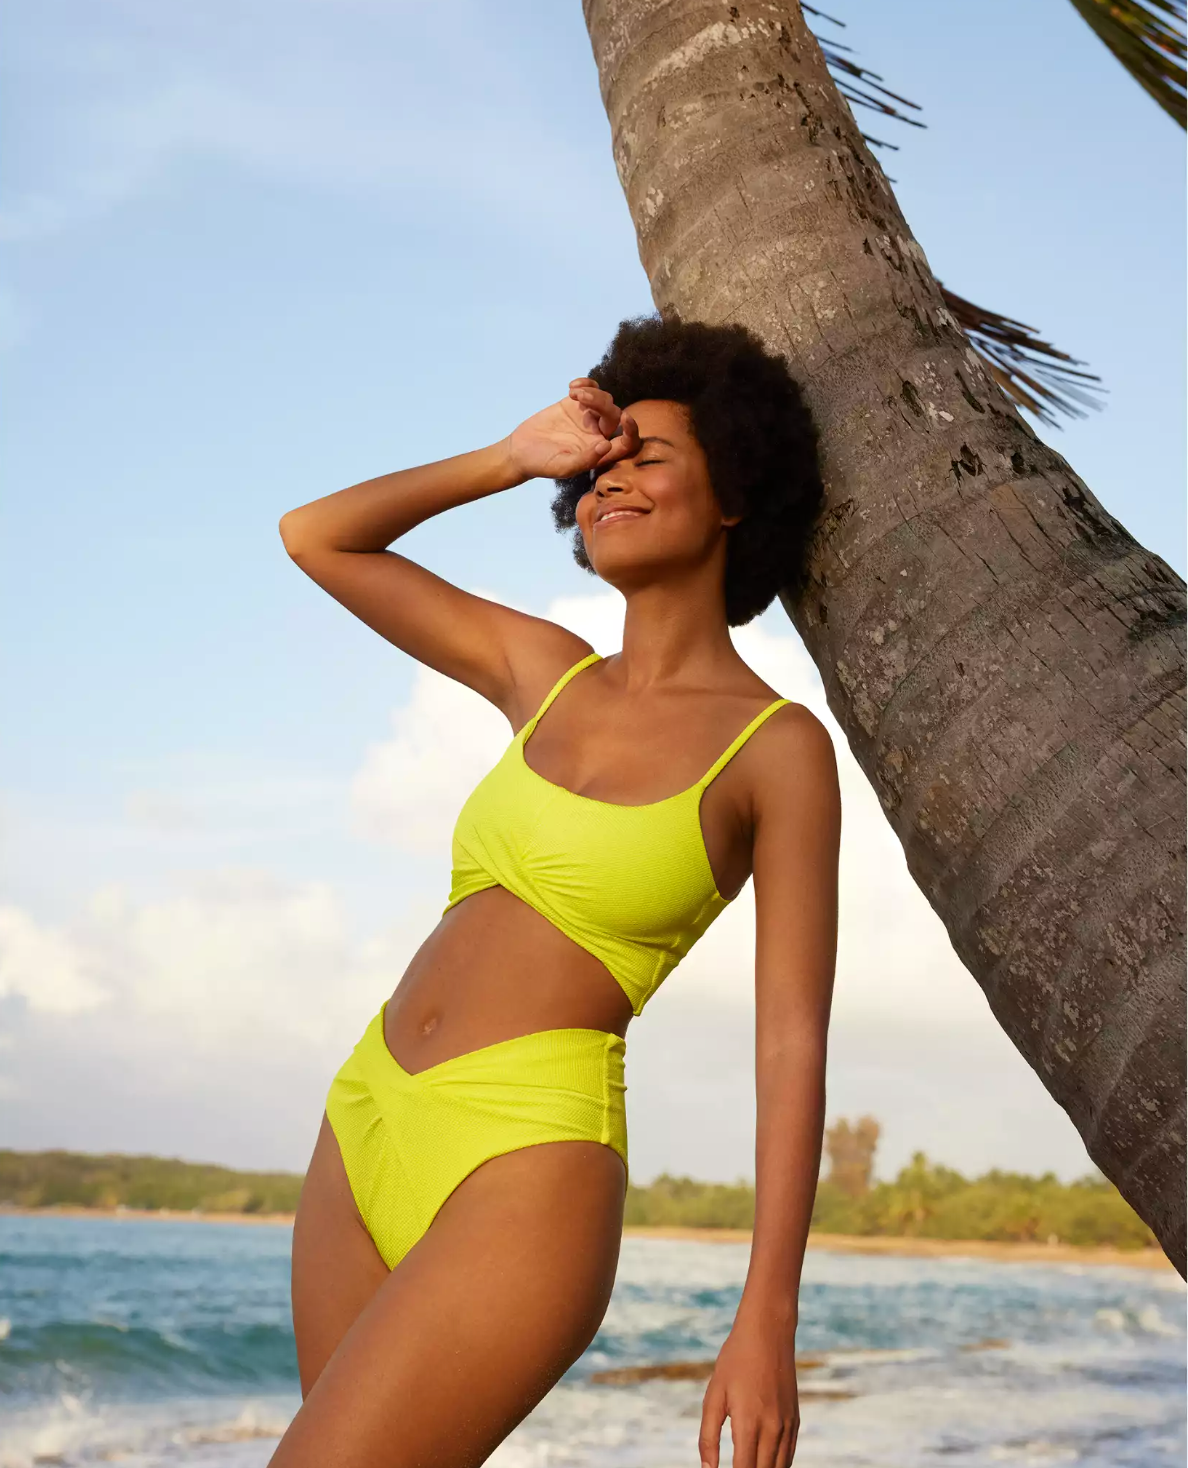 Aerie swimsuit sale: Save 40% on bikinis and one-pieces before summer 2023